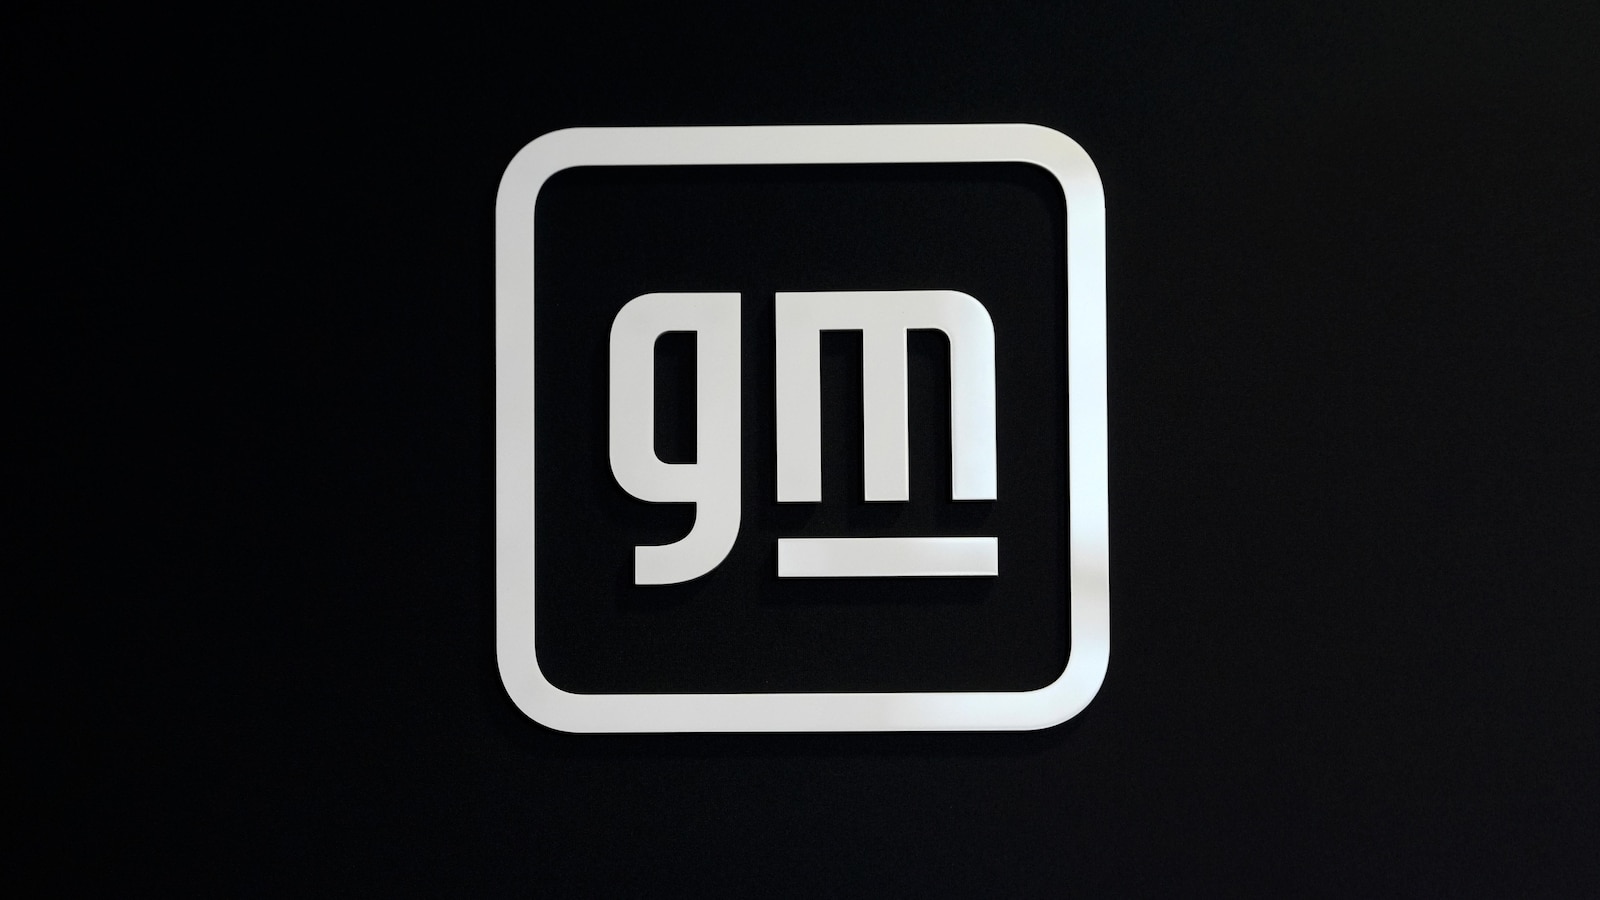 GM is promoting two former Apple executives to key roles in software and digital services development